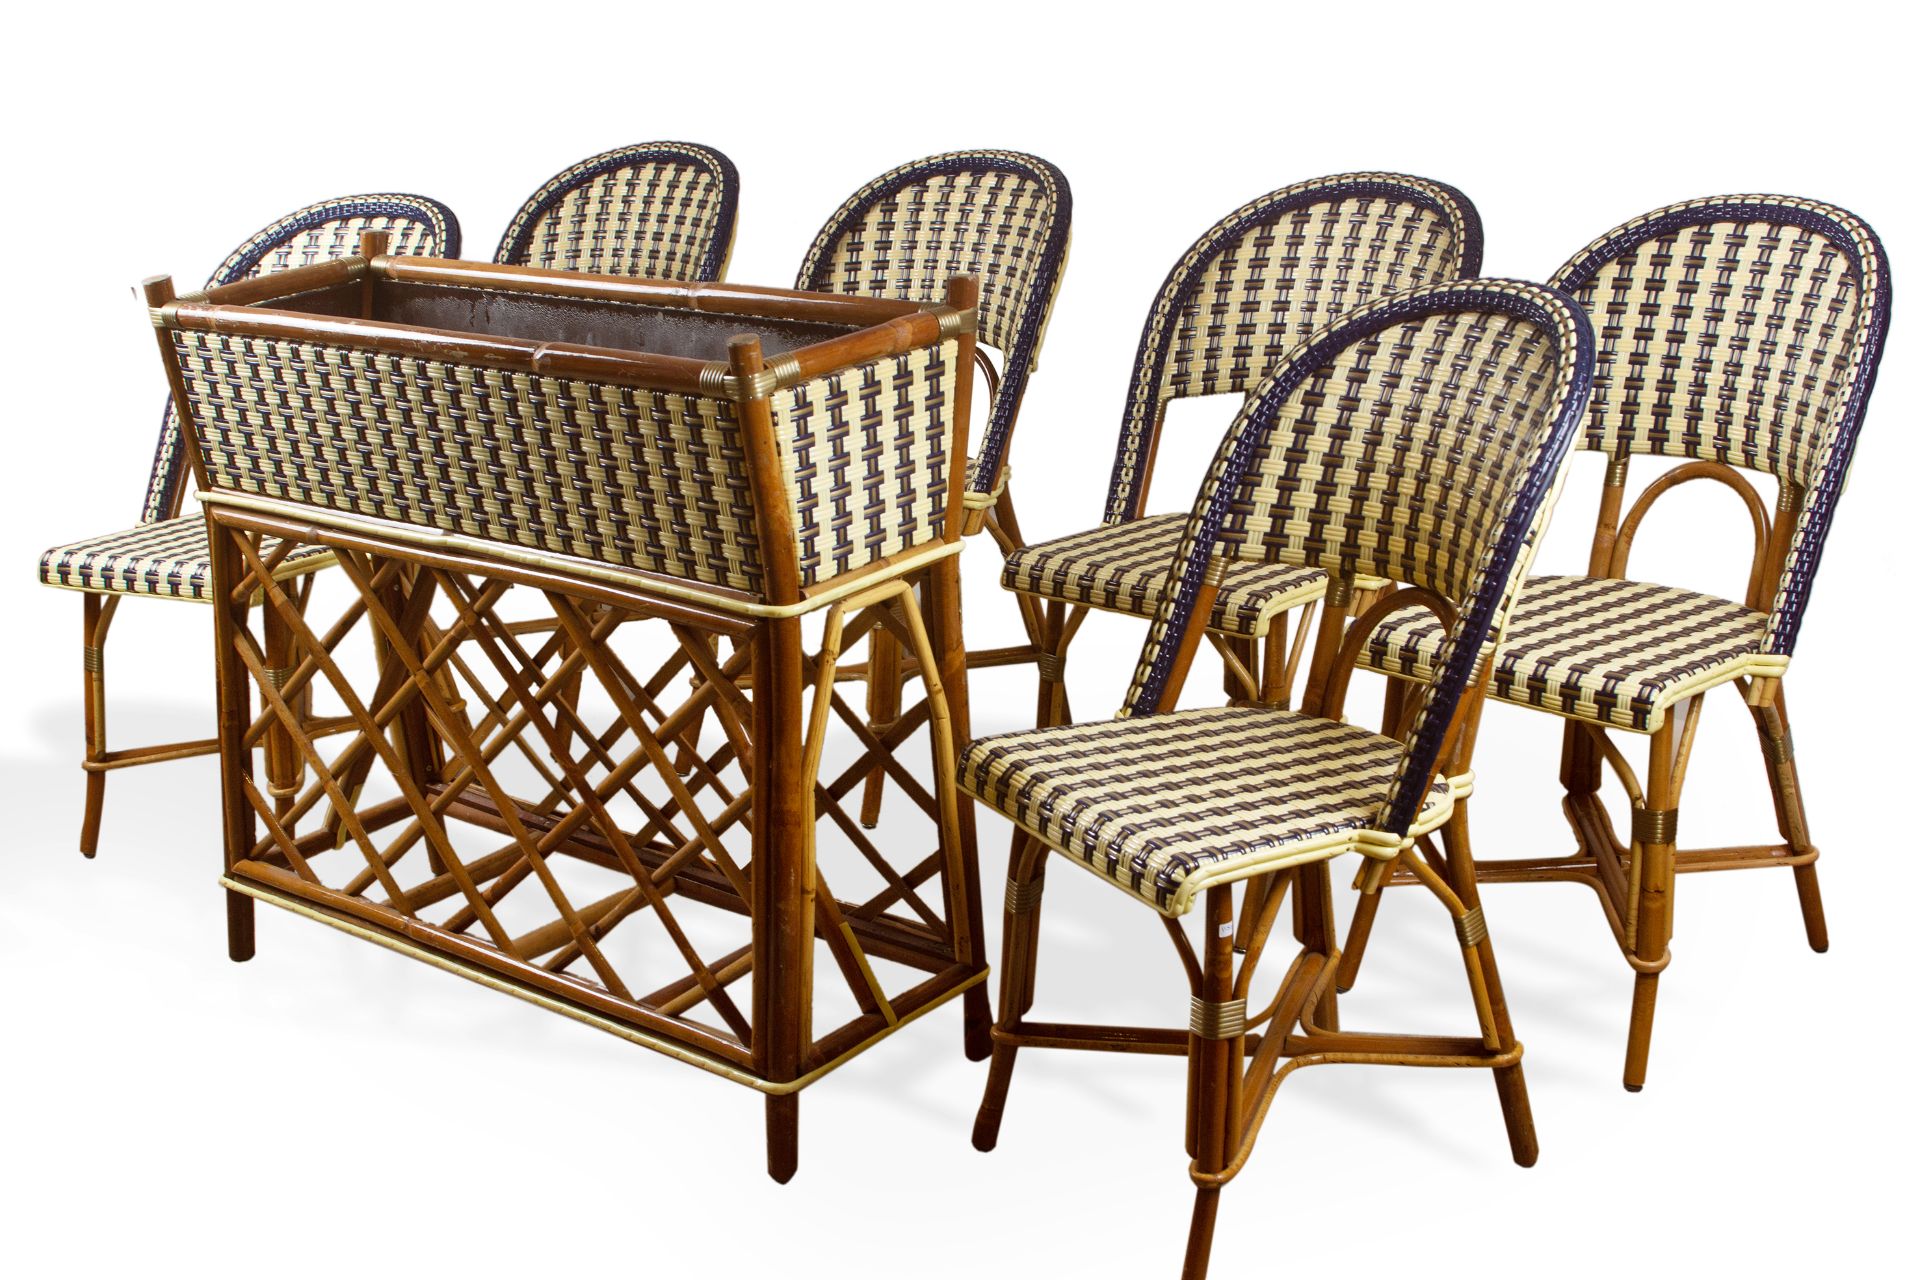 Maison Gatti. Set of six 'Select' chairs and a 'Croisillons' planter